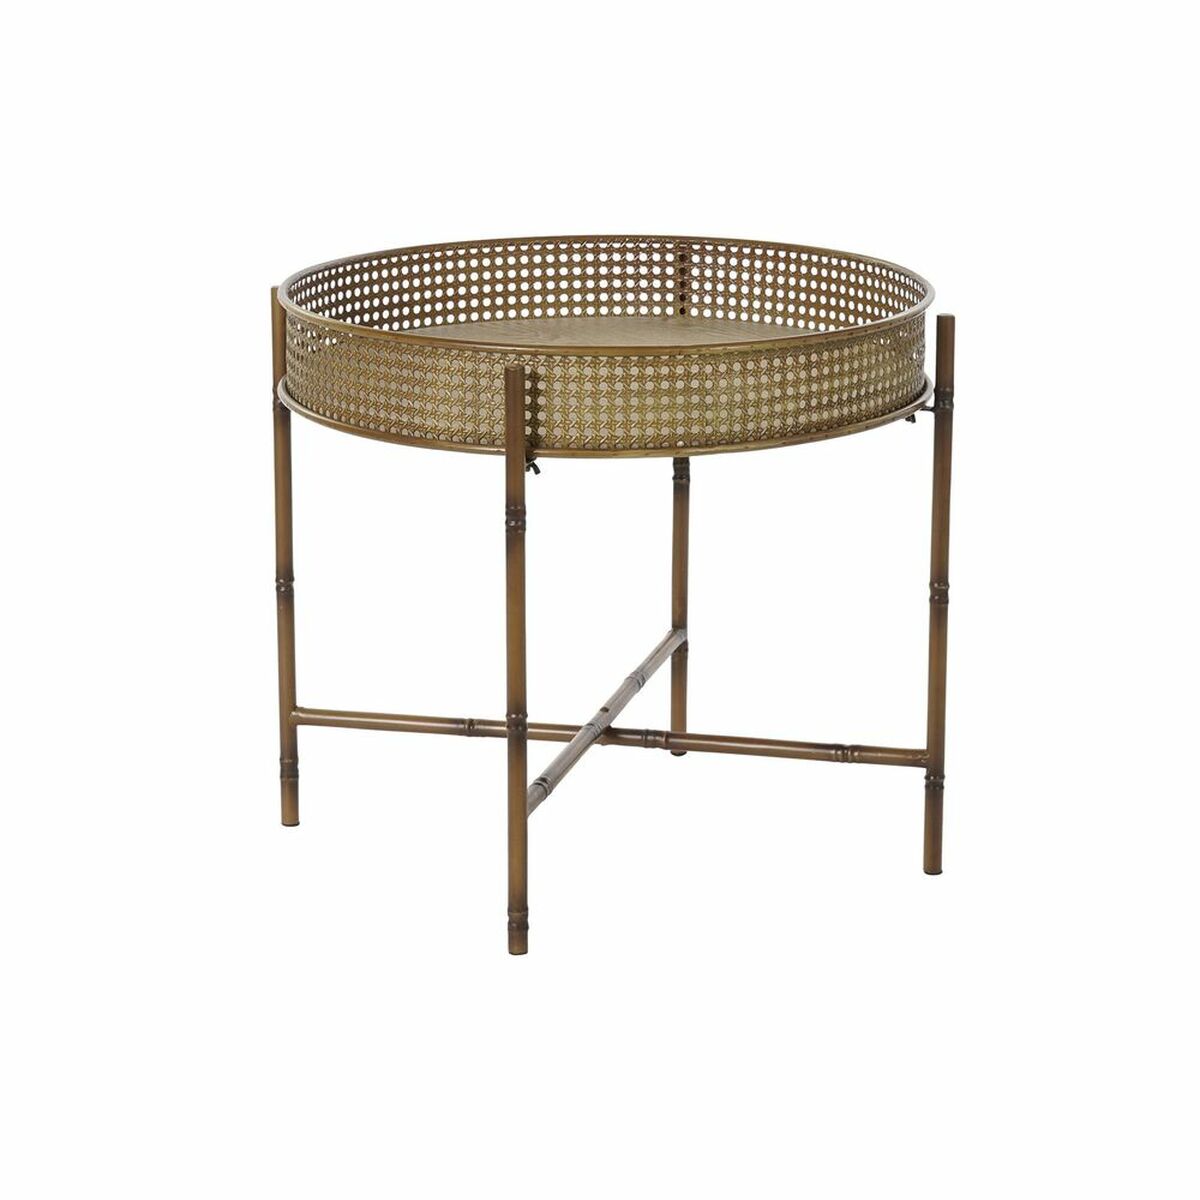 Side table DKD Home Decor 59 x 59 x 50 cm Natural Metal